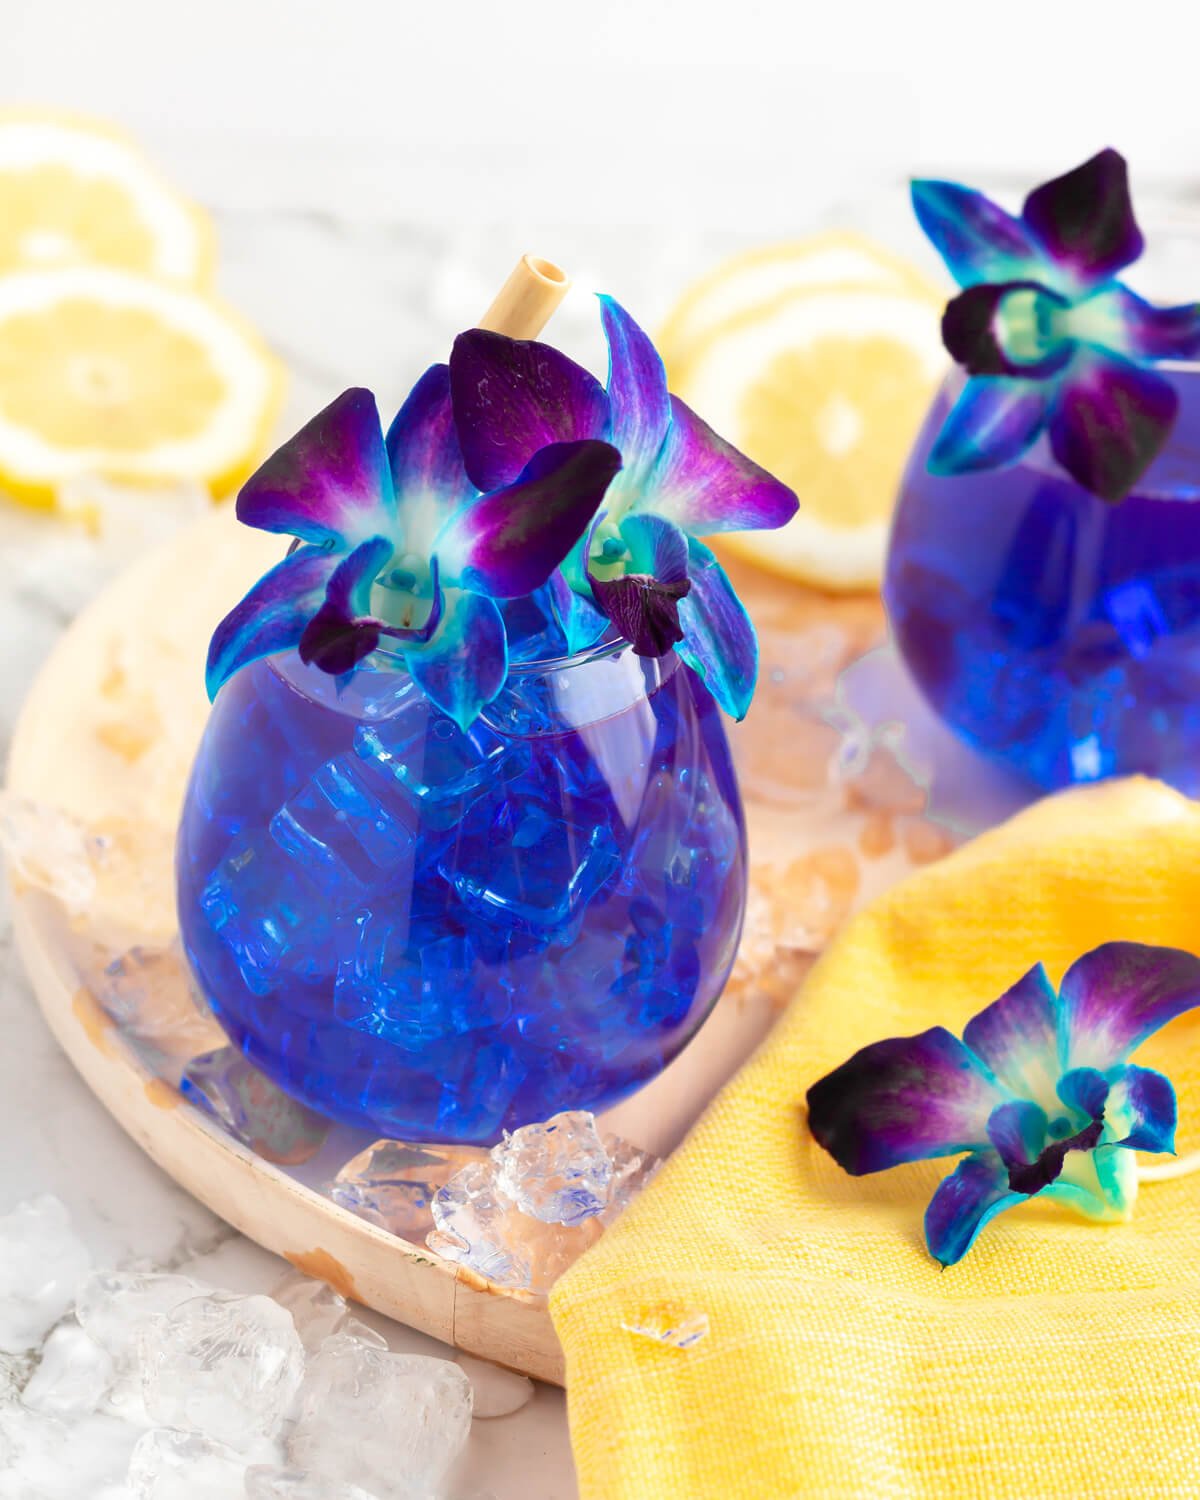 two vibrant blue lagoon mocktails garnished with blue and purple flowers on a wooden tray with ice and lemon scattered nearby.